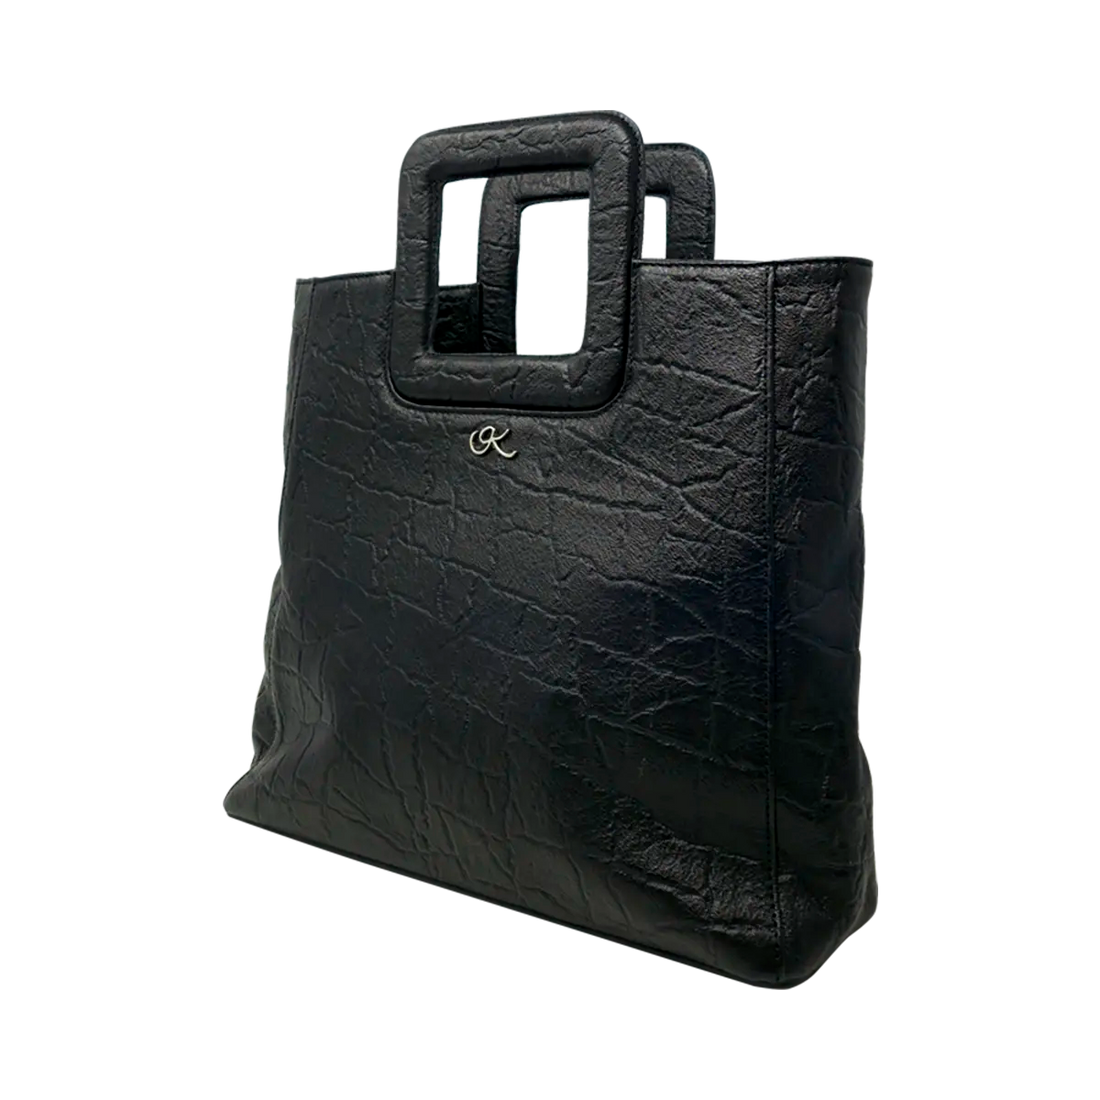 large black leather print handbag with a square handle. Accessory for women in San Diego, CA.